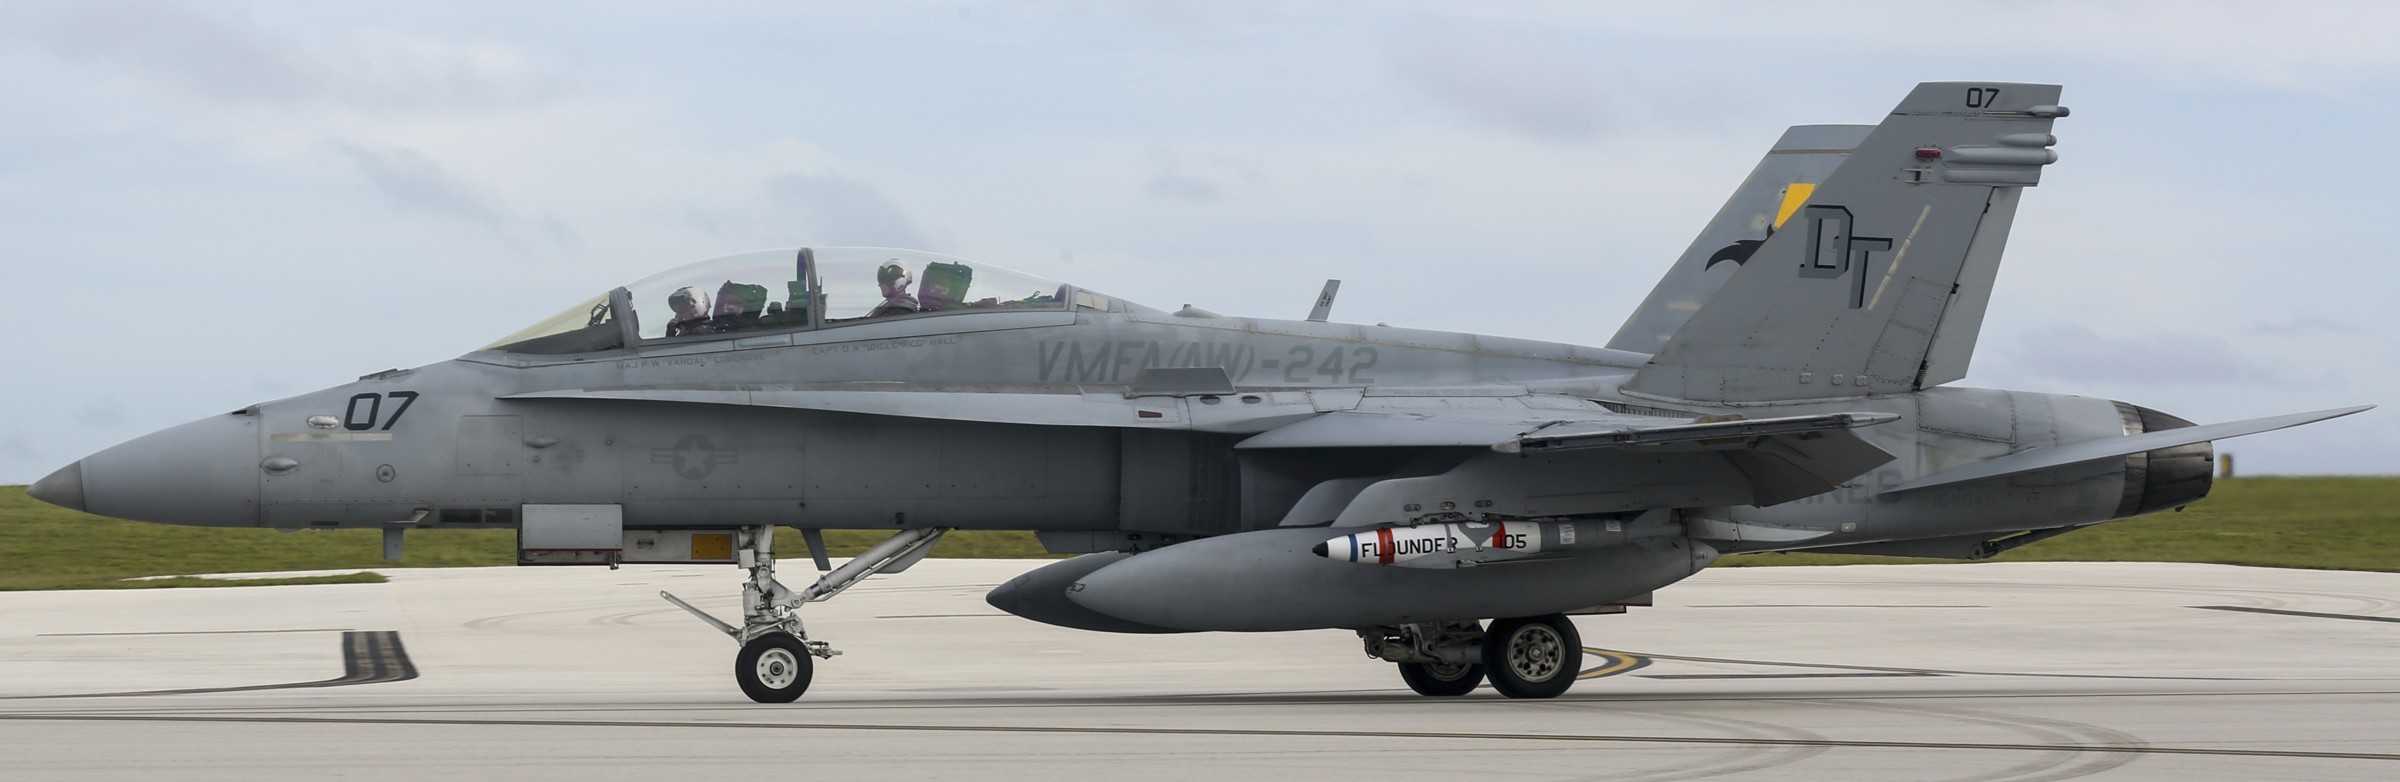 vmfa(aw)-242 bats marine all-weather fighter attack squadron usmc f/a-18d hornet 68 exercise valiant shield andersen afb guam